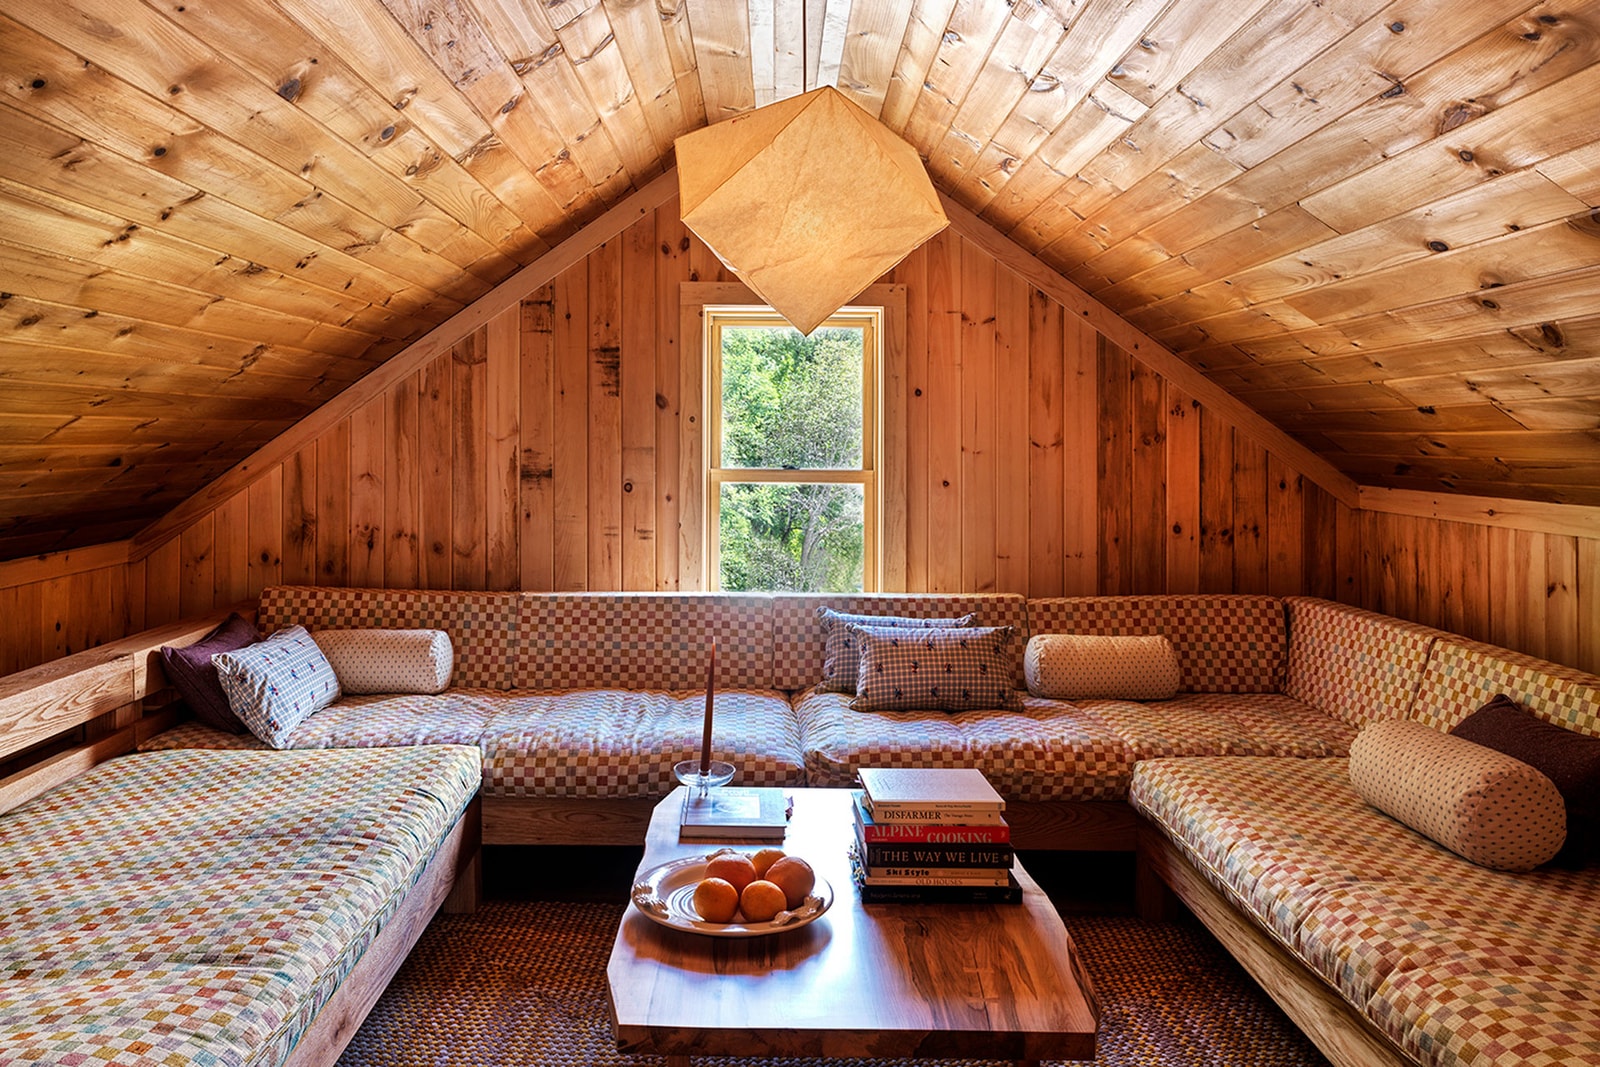 How Upstate NY Resort Design Strikes the Balance Between Charm and Tranquility Design